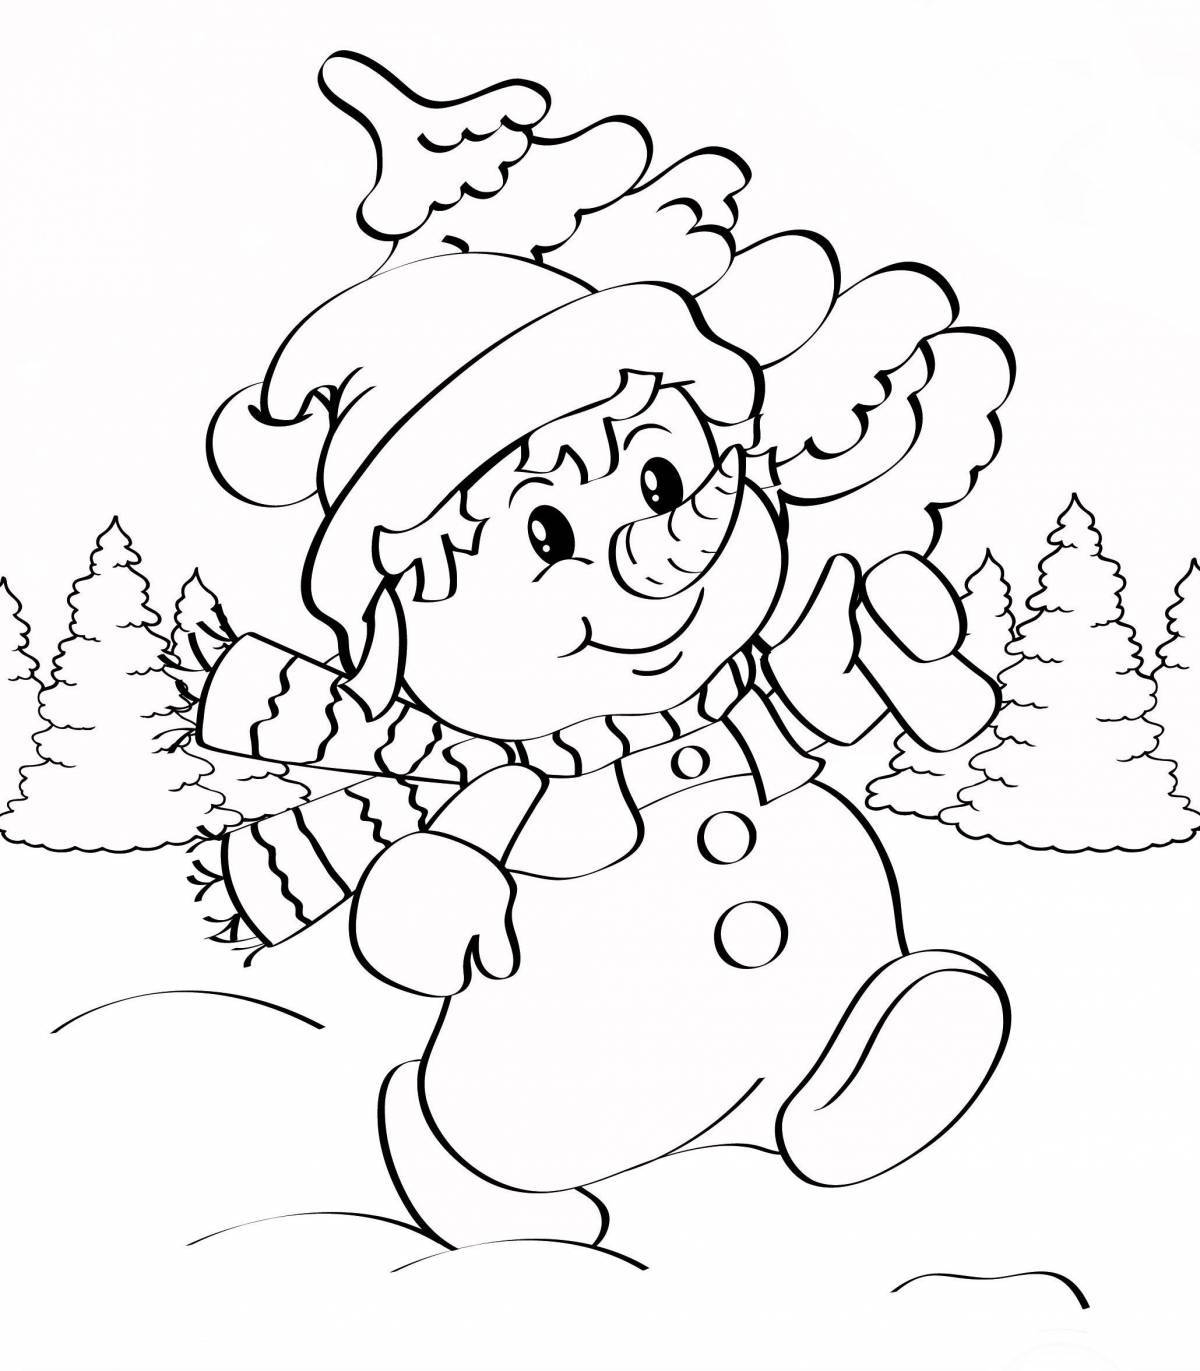 A fun Christmas coloring book for kids